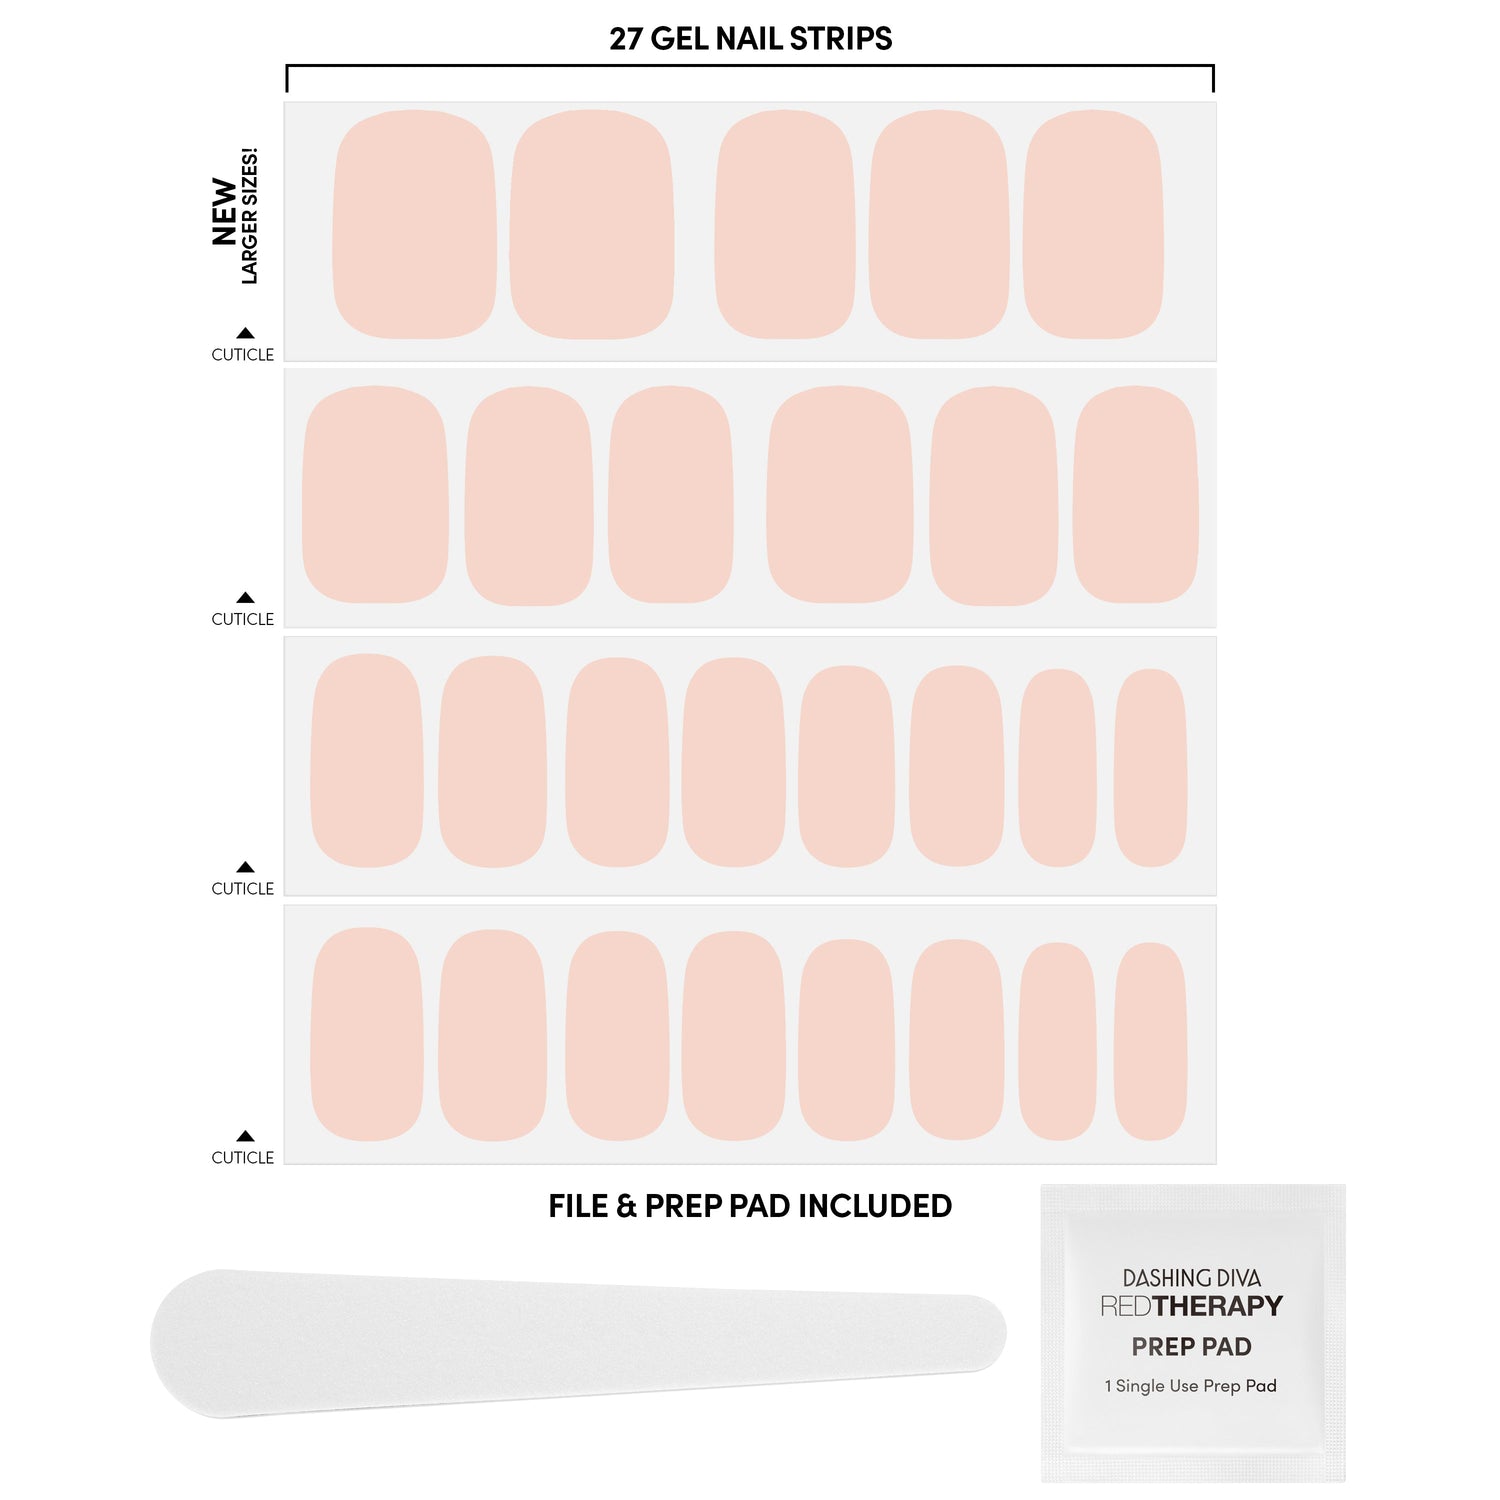 SIZING CHART, RED THERAPY PREP PAD INCLUDED, NAIL FILE,  